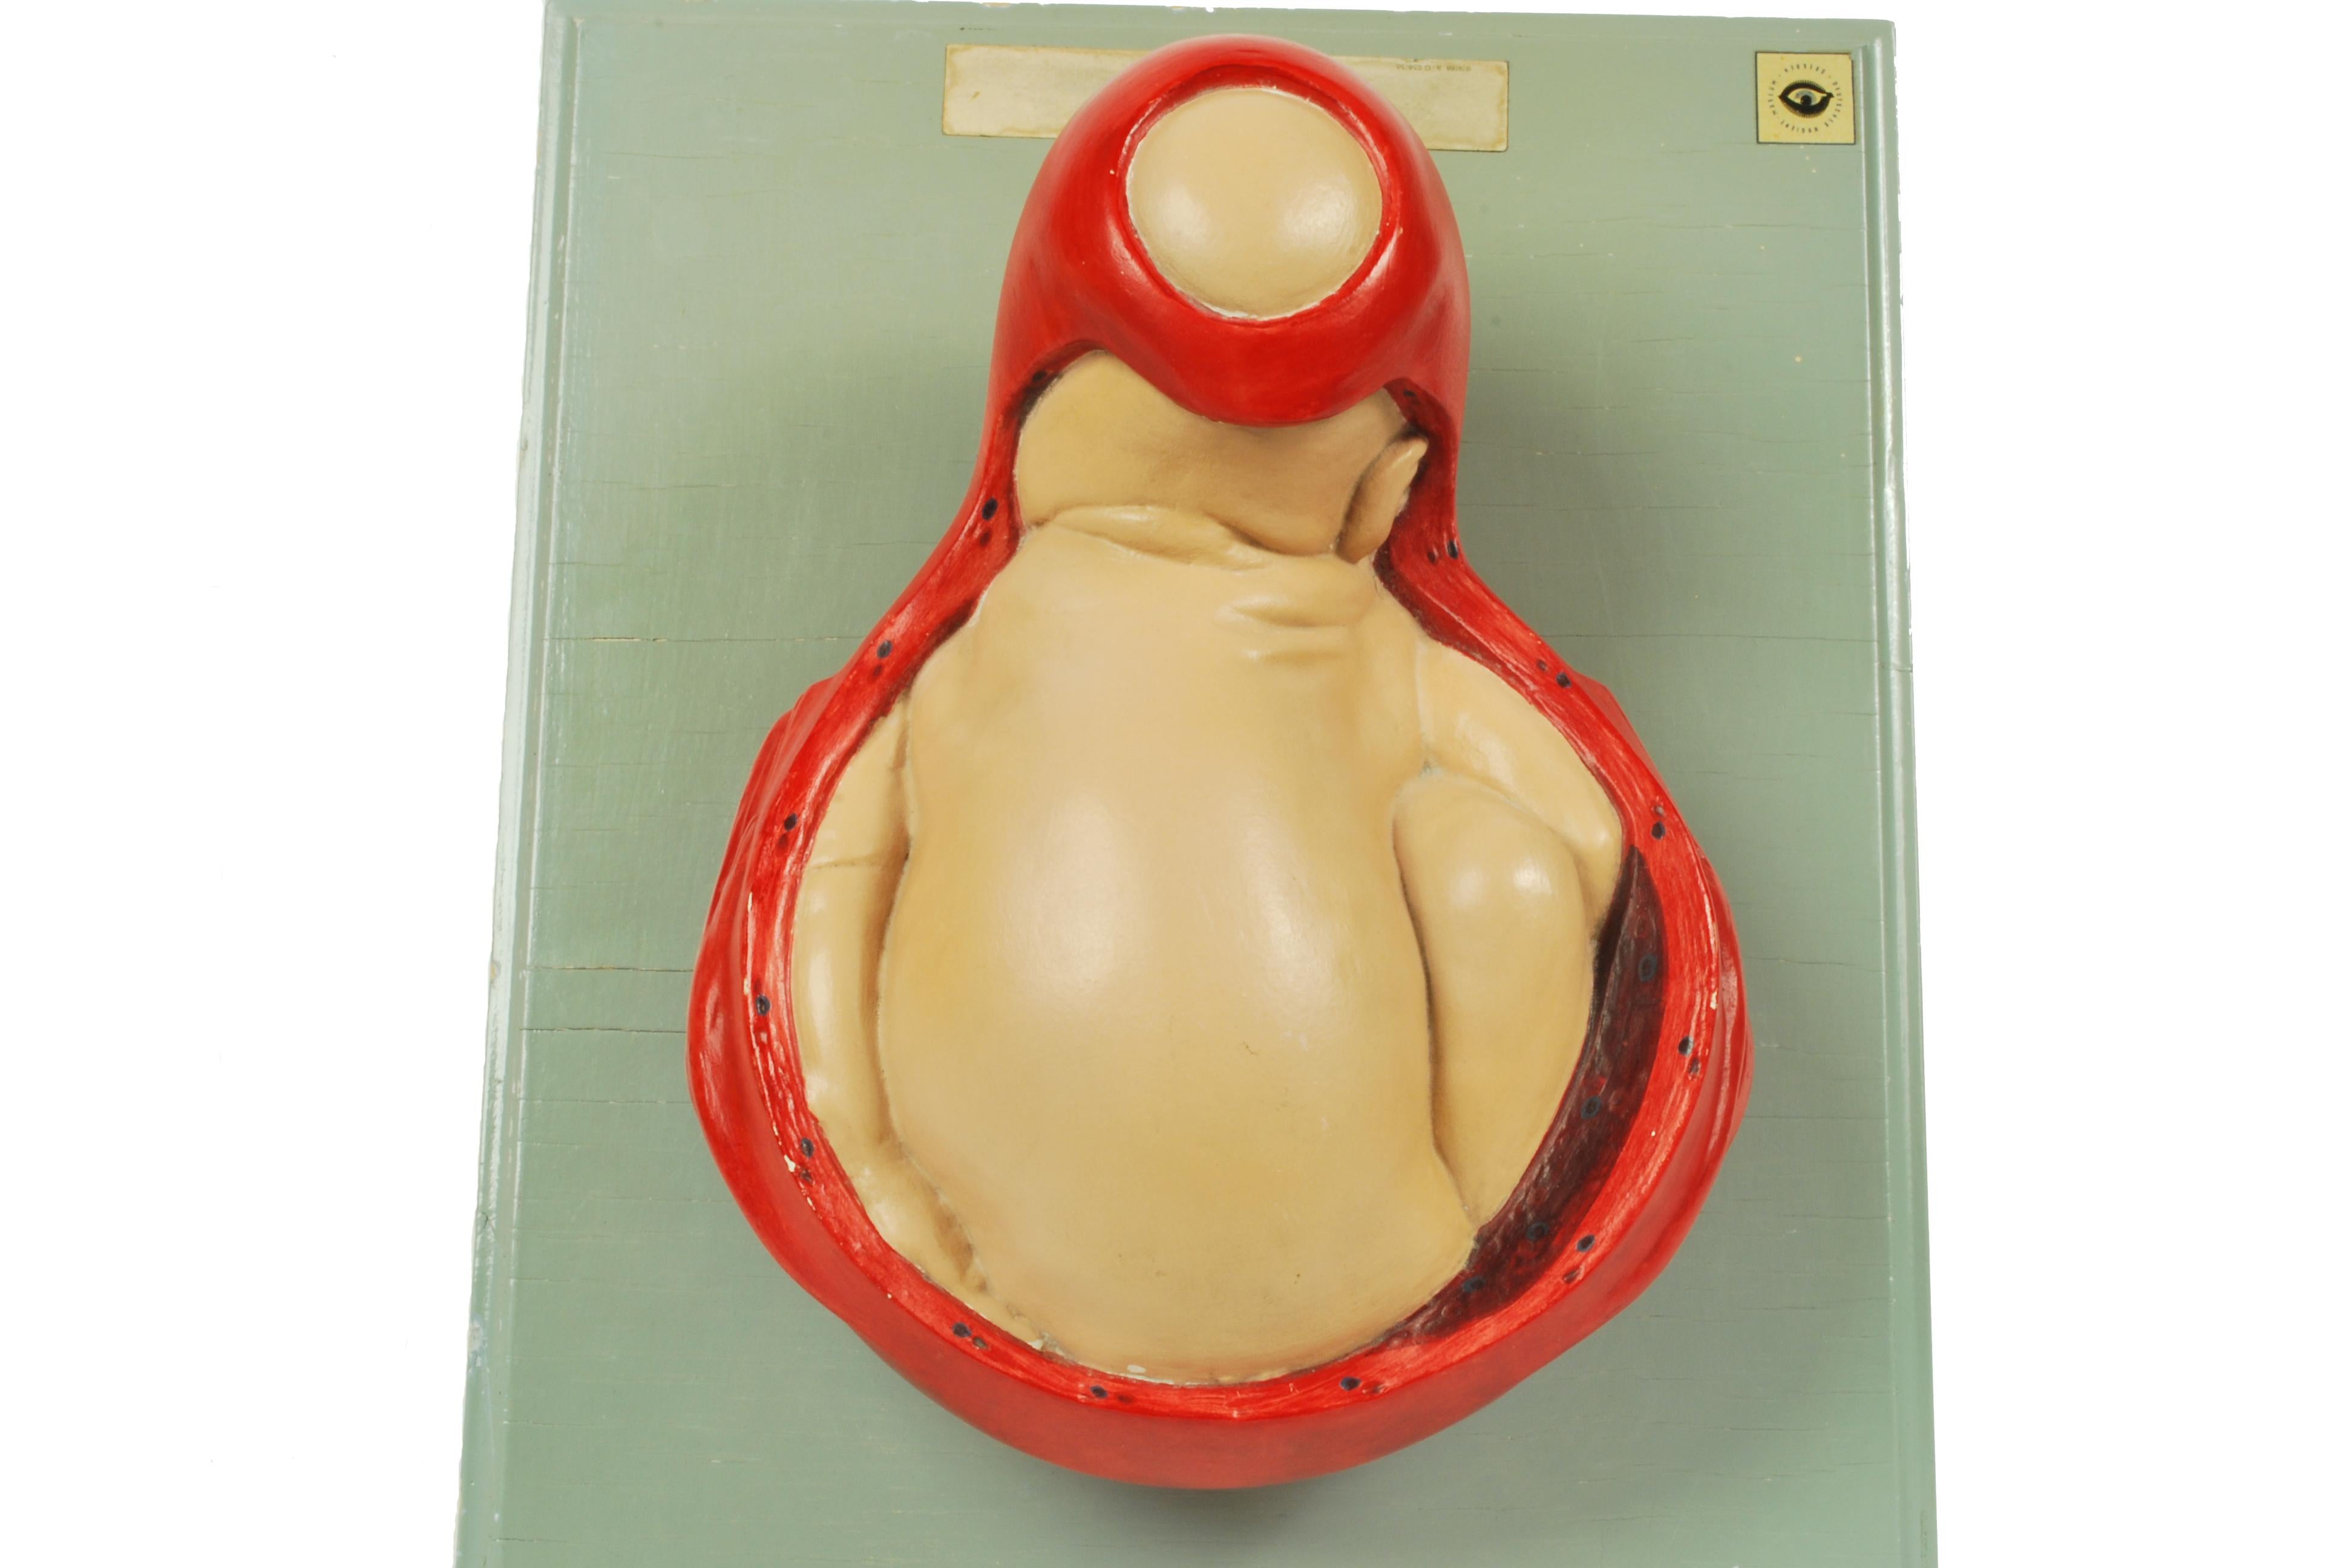 Educational model, papier maché and plaster, decipting a baby borning. 1930s-1940s, sold by the Hygiene Museum in Dresden. Very good condition. Measures of the board cm 45x35 - inches 17.72x13.77.

The creation of the Deutsches Hygiene-Museum